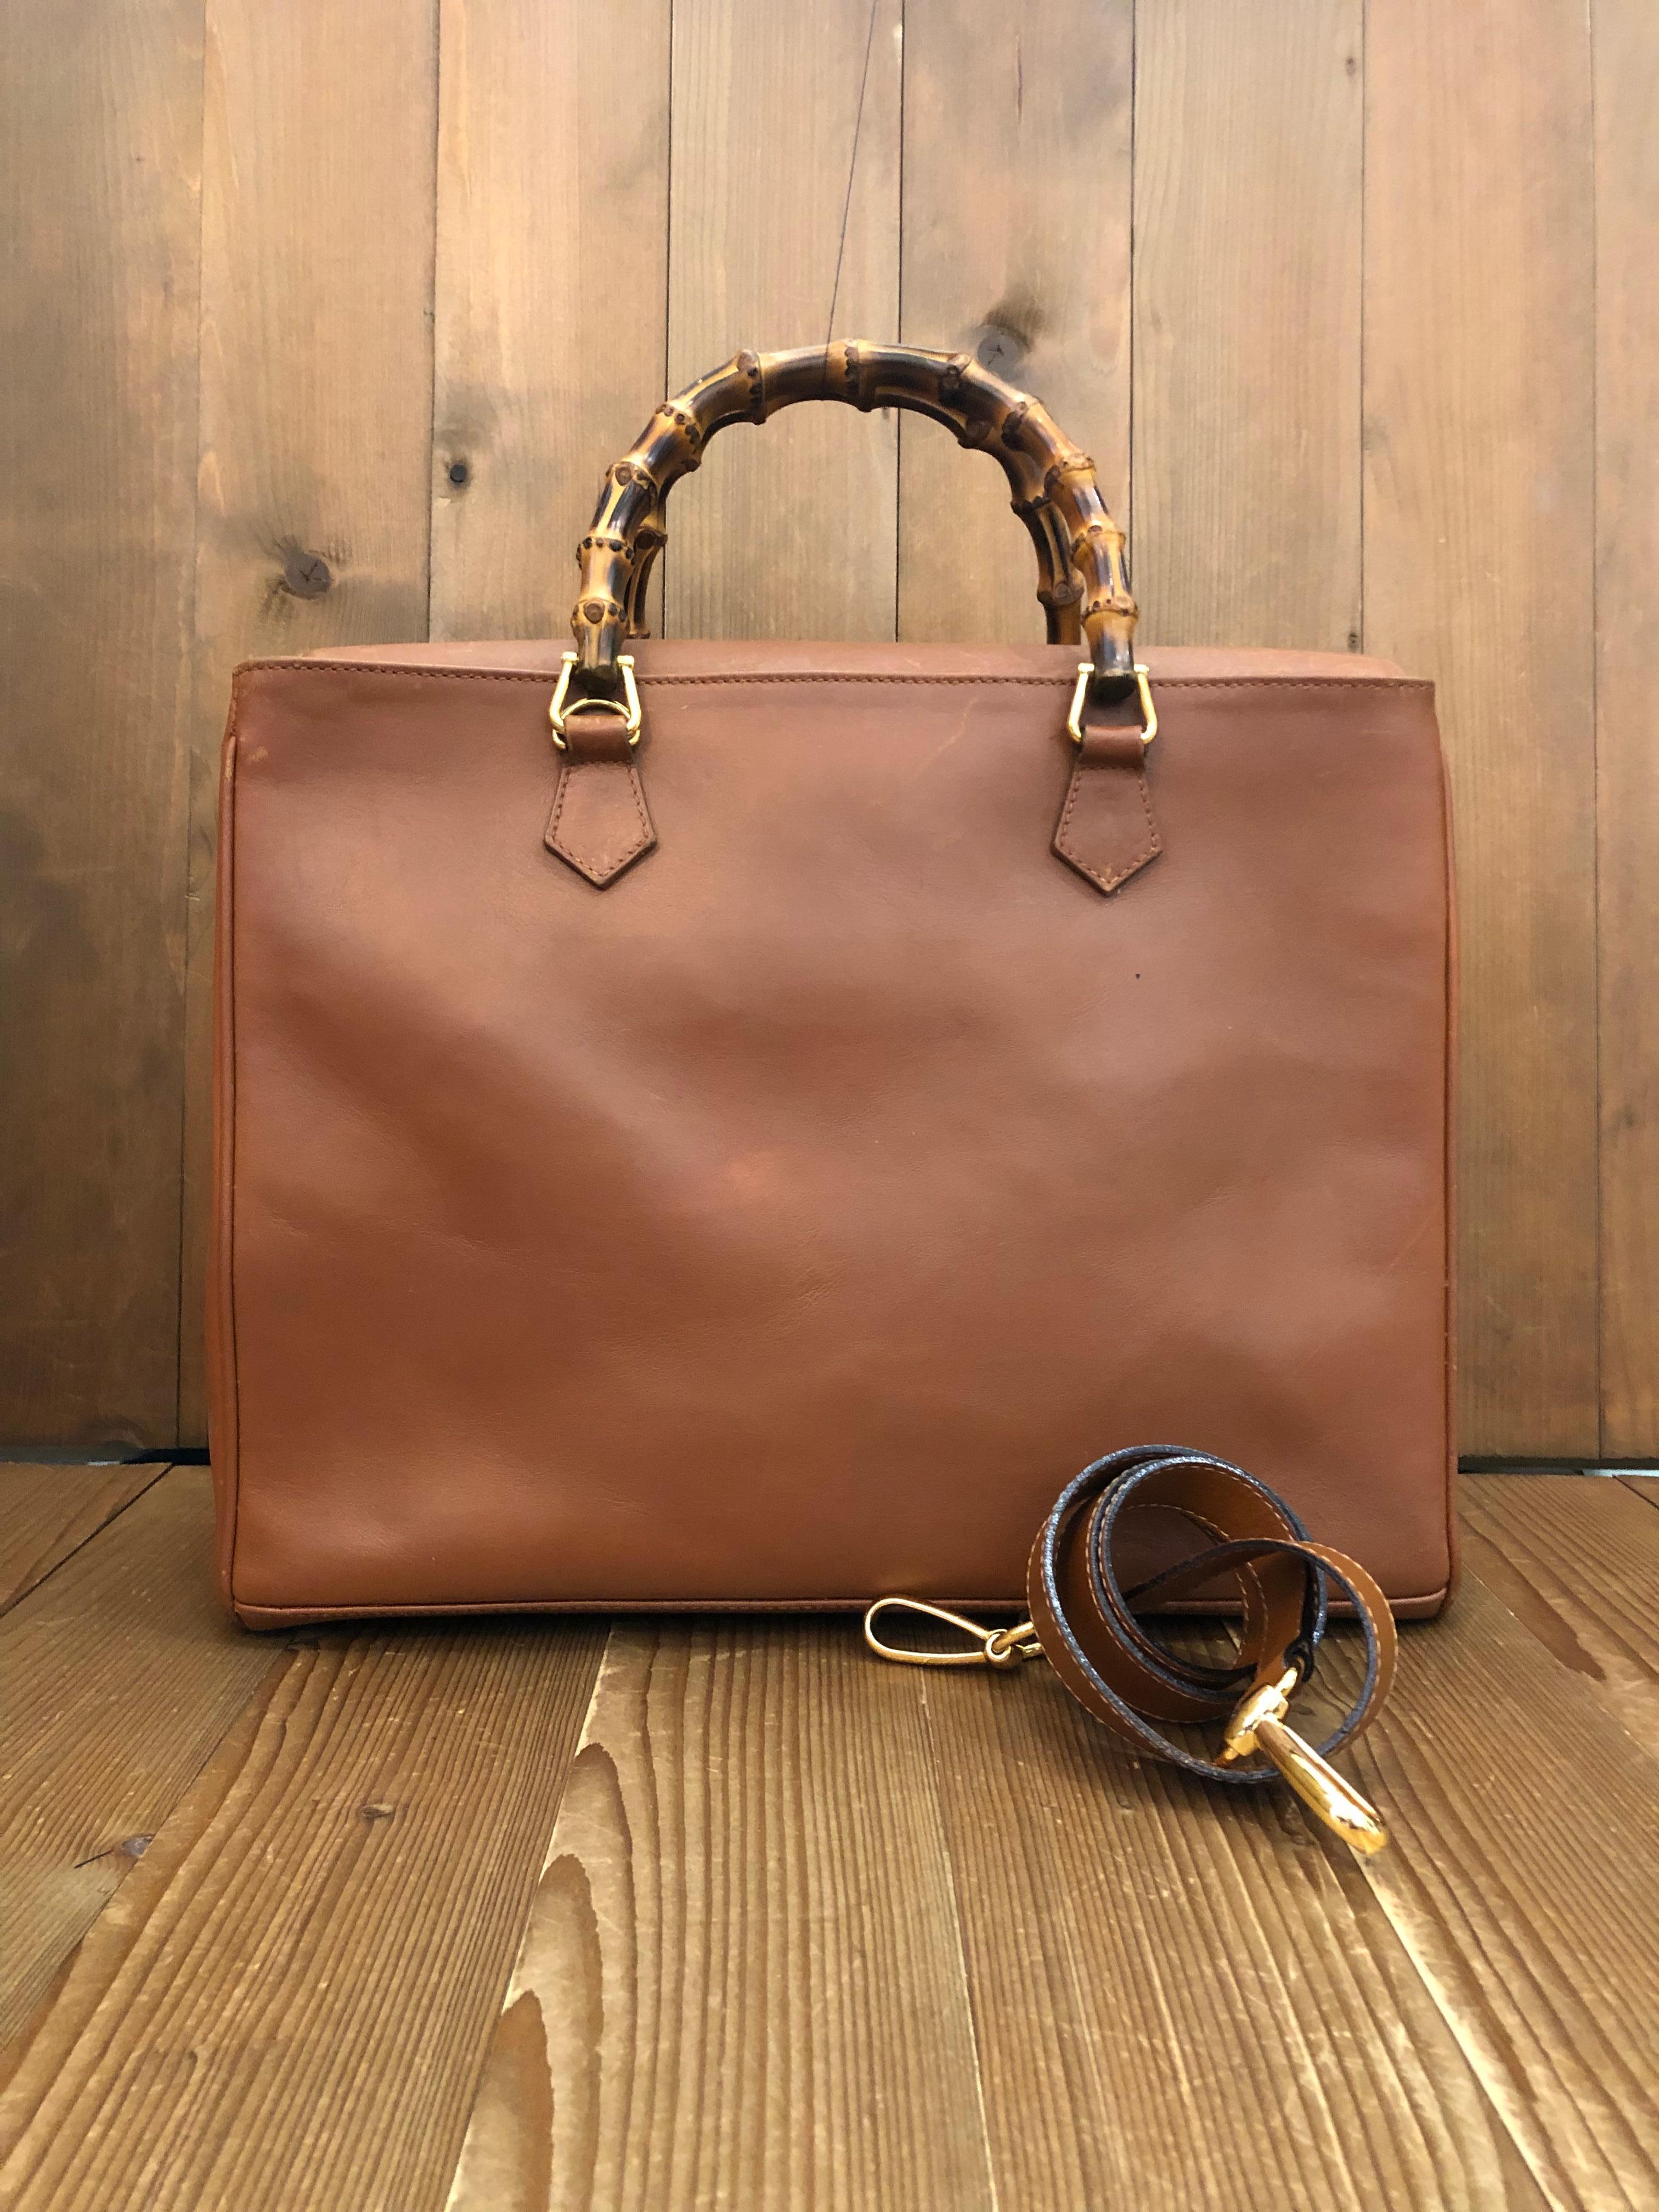 This vintage GUCCI bamboo document tote is crafted of calf leather in tan color featuring gold toned hardware. Top magnetic snap closure open to a new interior in beige featuring a zippered compartment in the middle and a zipper pocket. The front